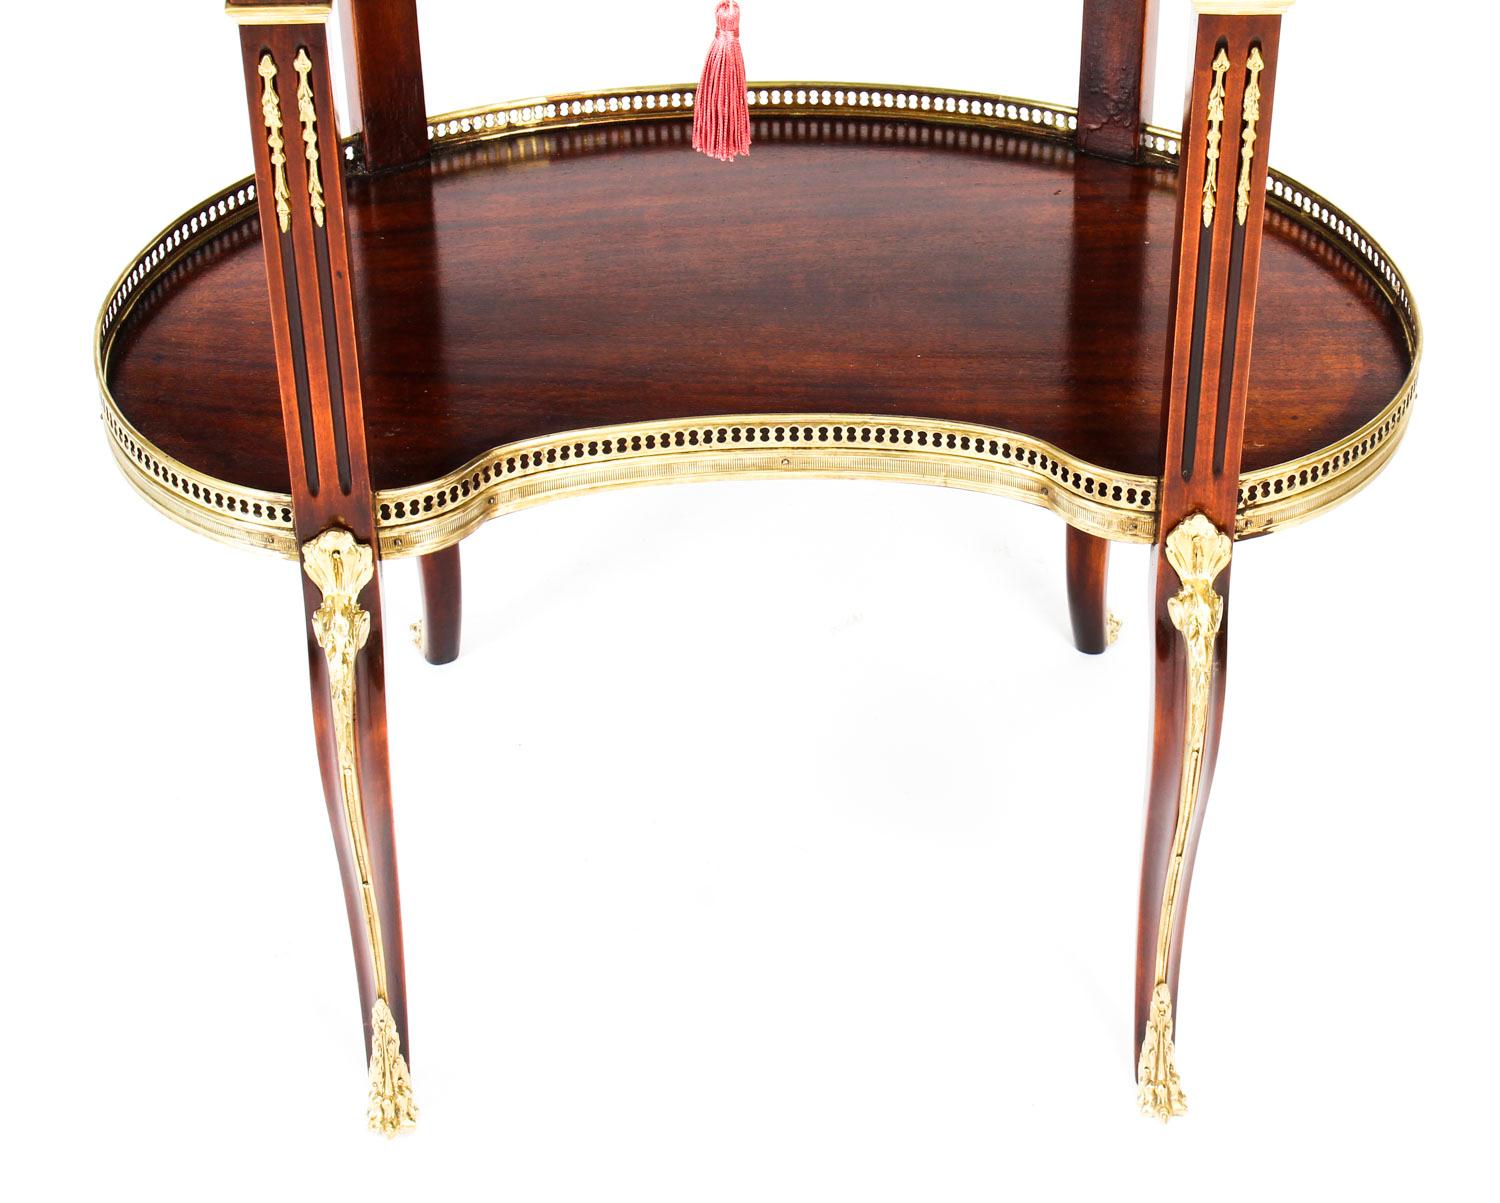 French Louis XVI Revival Kidney Shaped Marble-Top Side Table, 19th Century 6